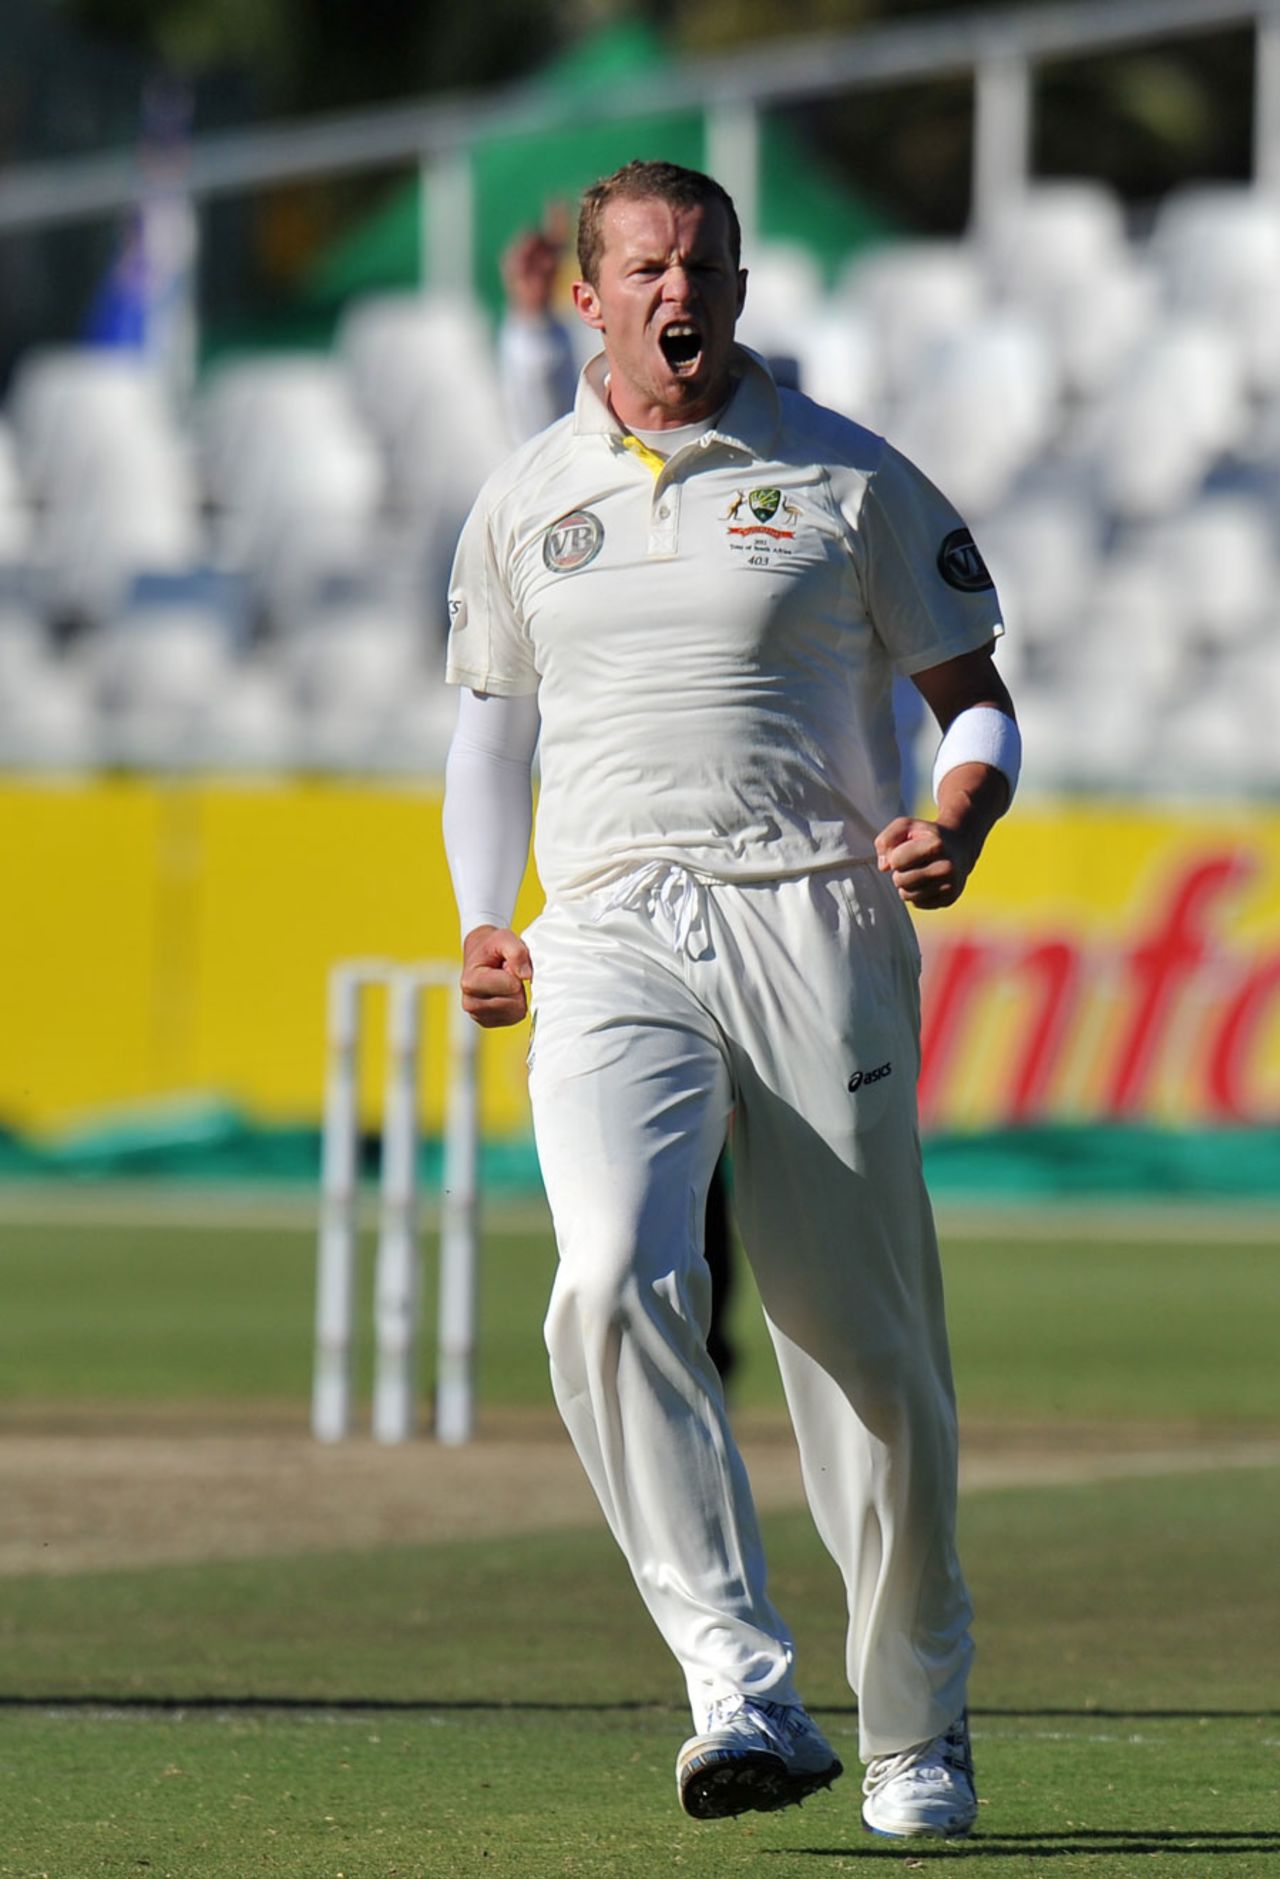 Peter Siddle is pumped up after dismissing Jacques Rudolph, South Africa v Australia, 1st Test, Cape Town, 2nd day, November 10, 2011